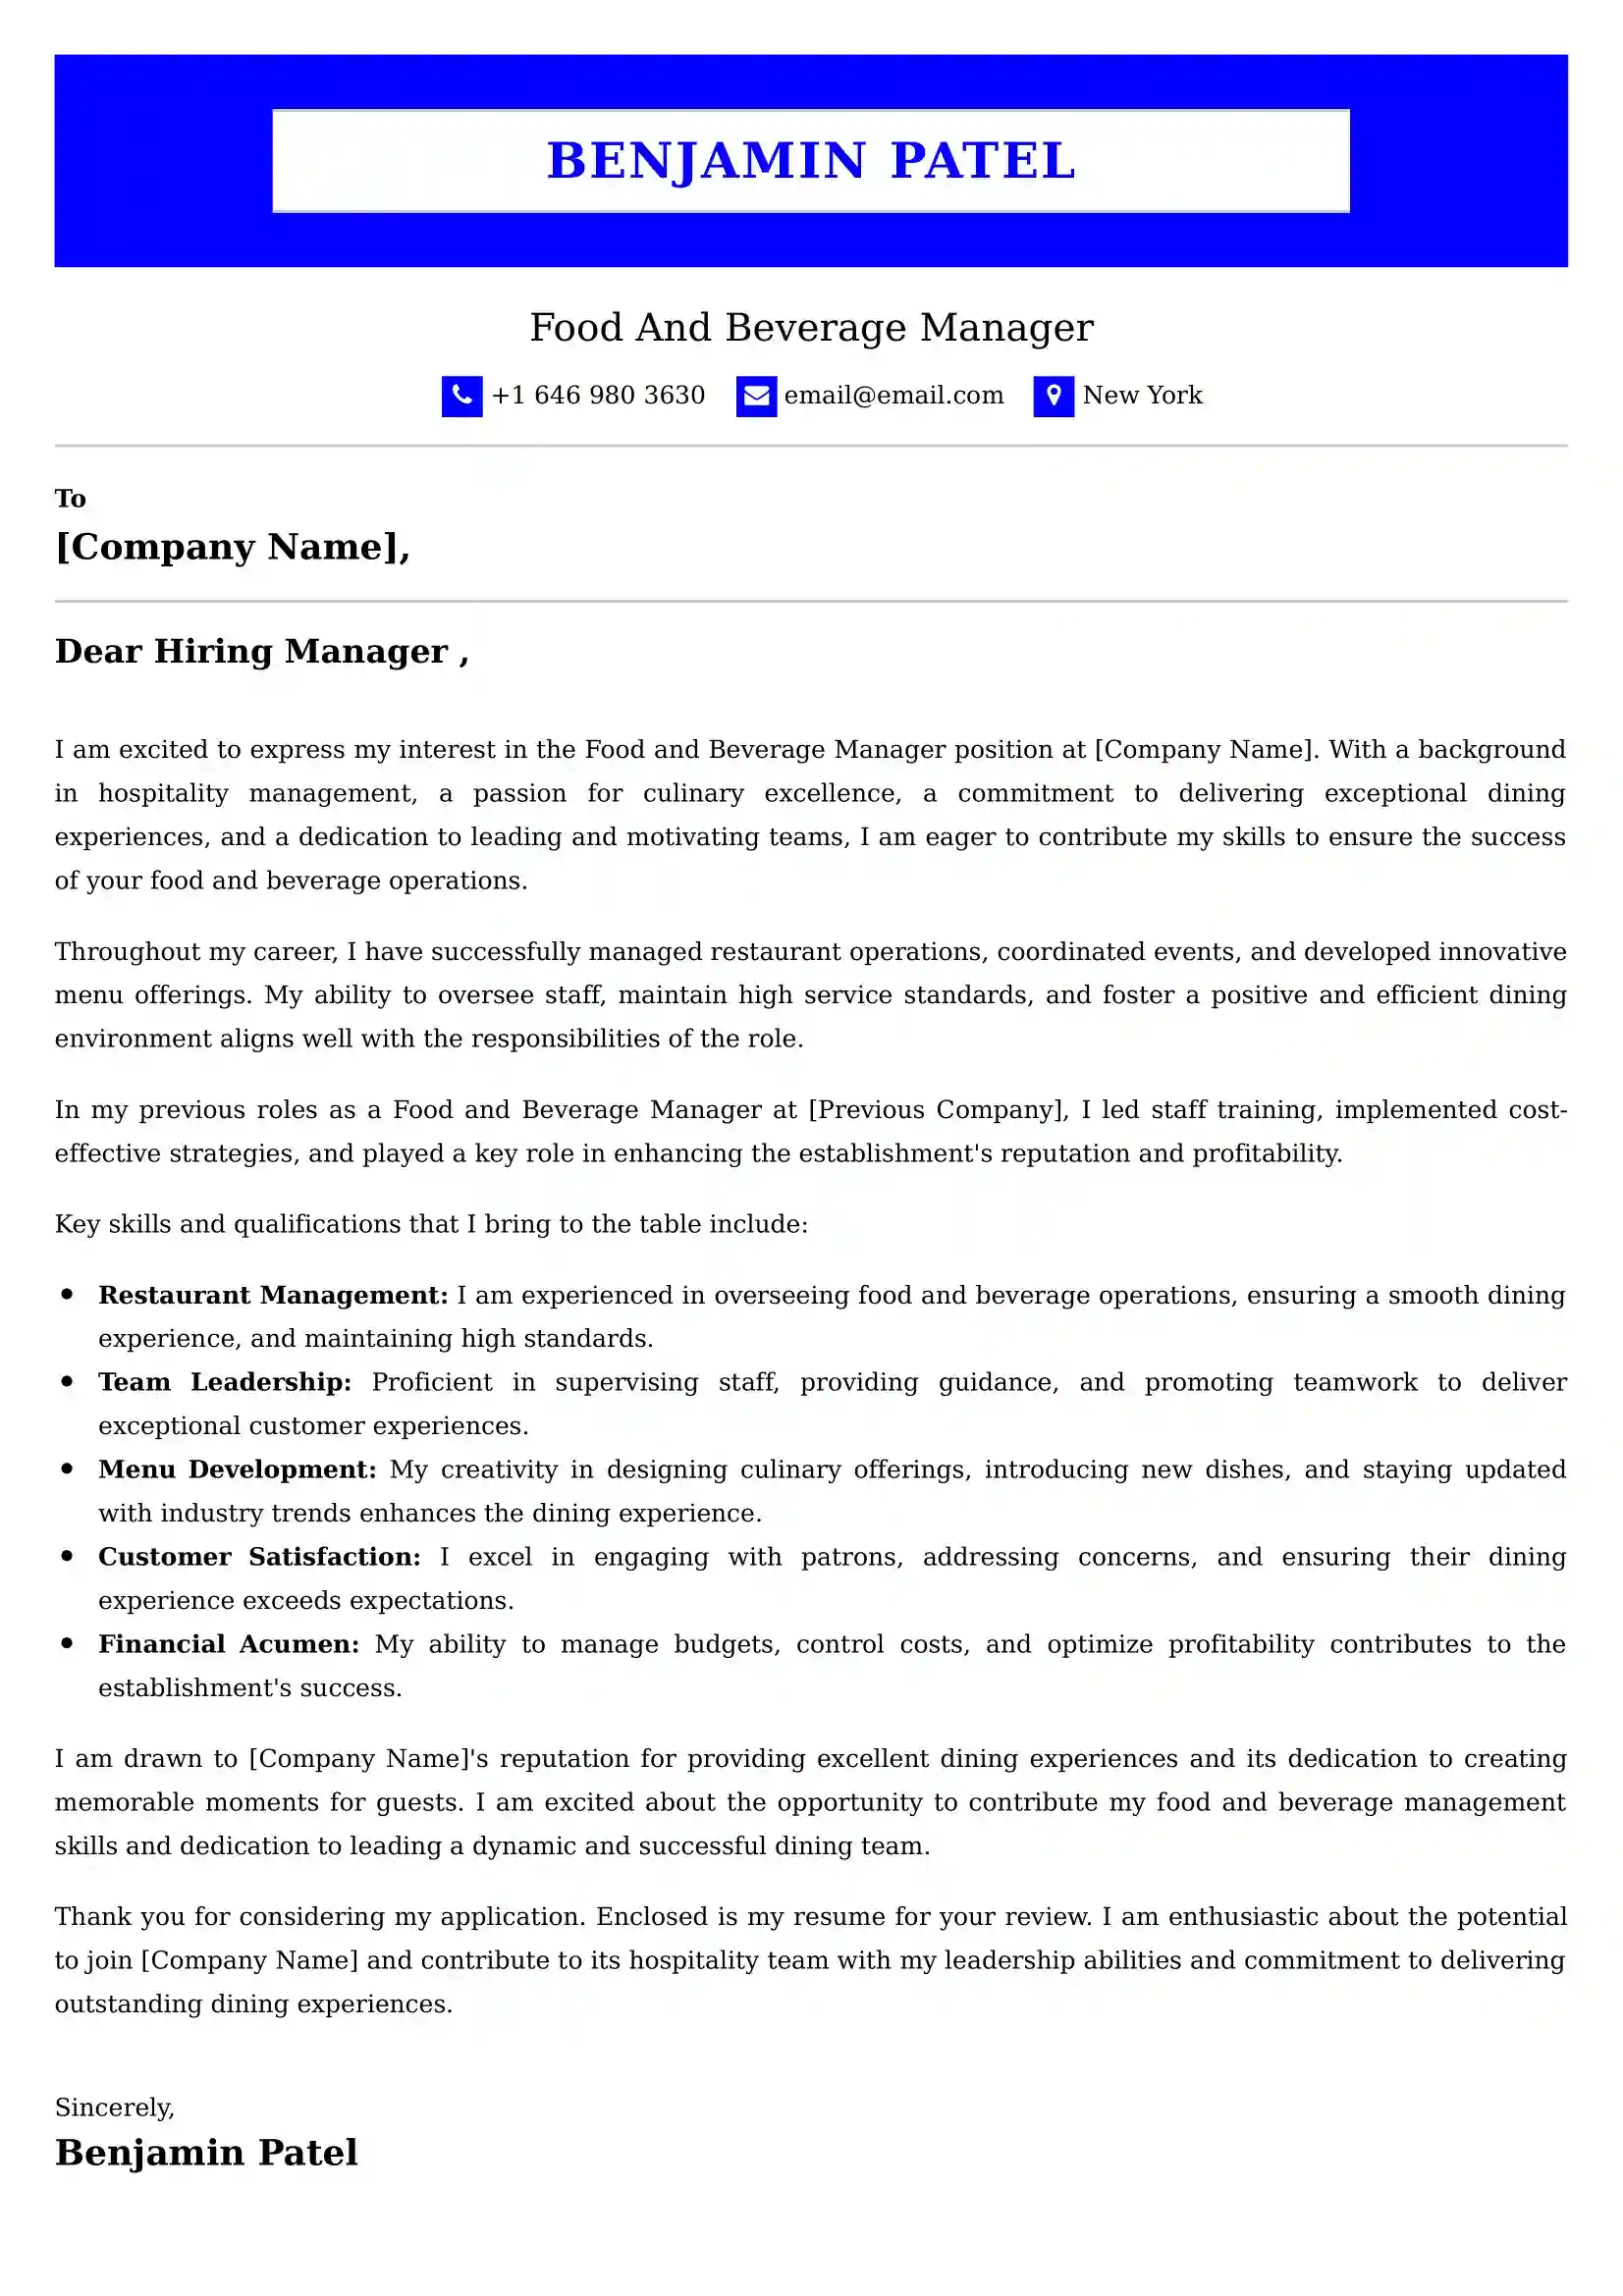 Food And Beverage Manager Cover Letter Examples - Latest UK Format